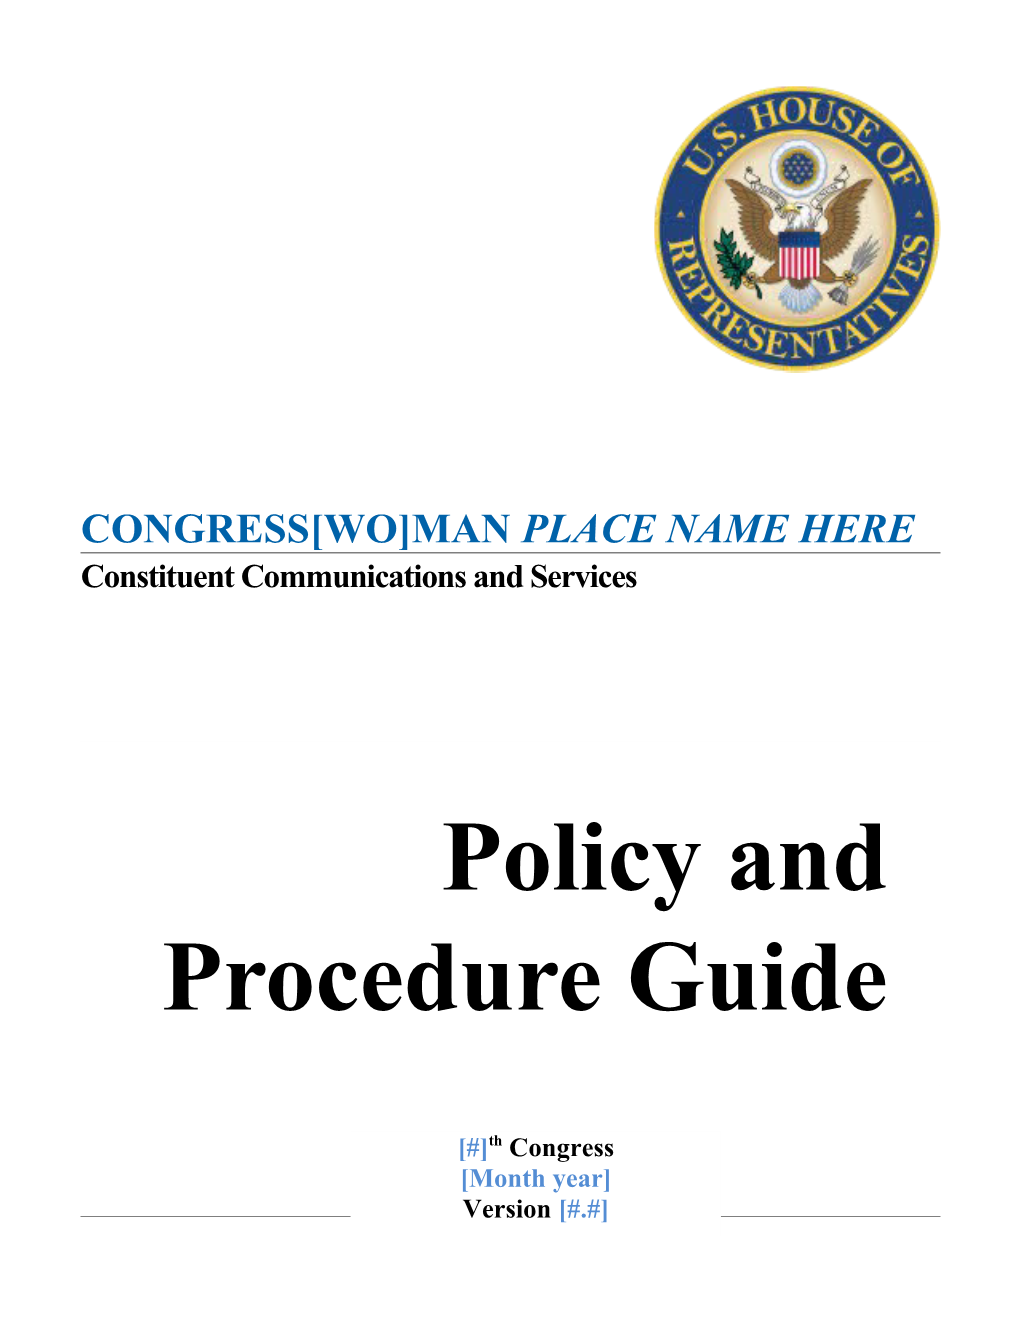 Constituent Communications Policy And Procedures Guide For The House